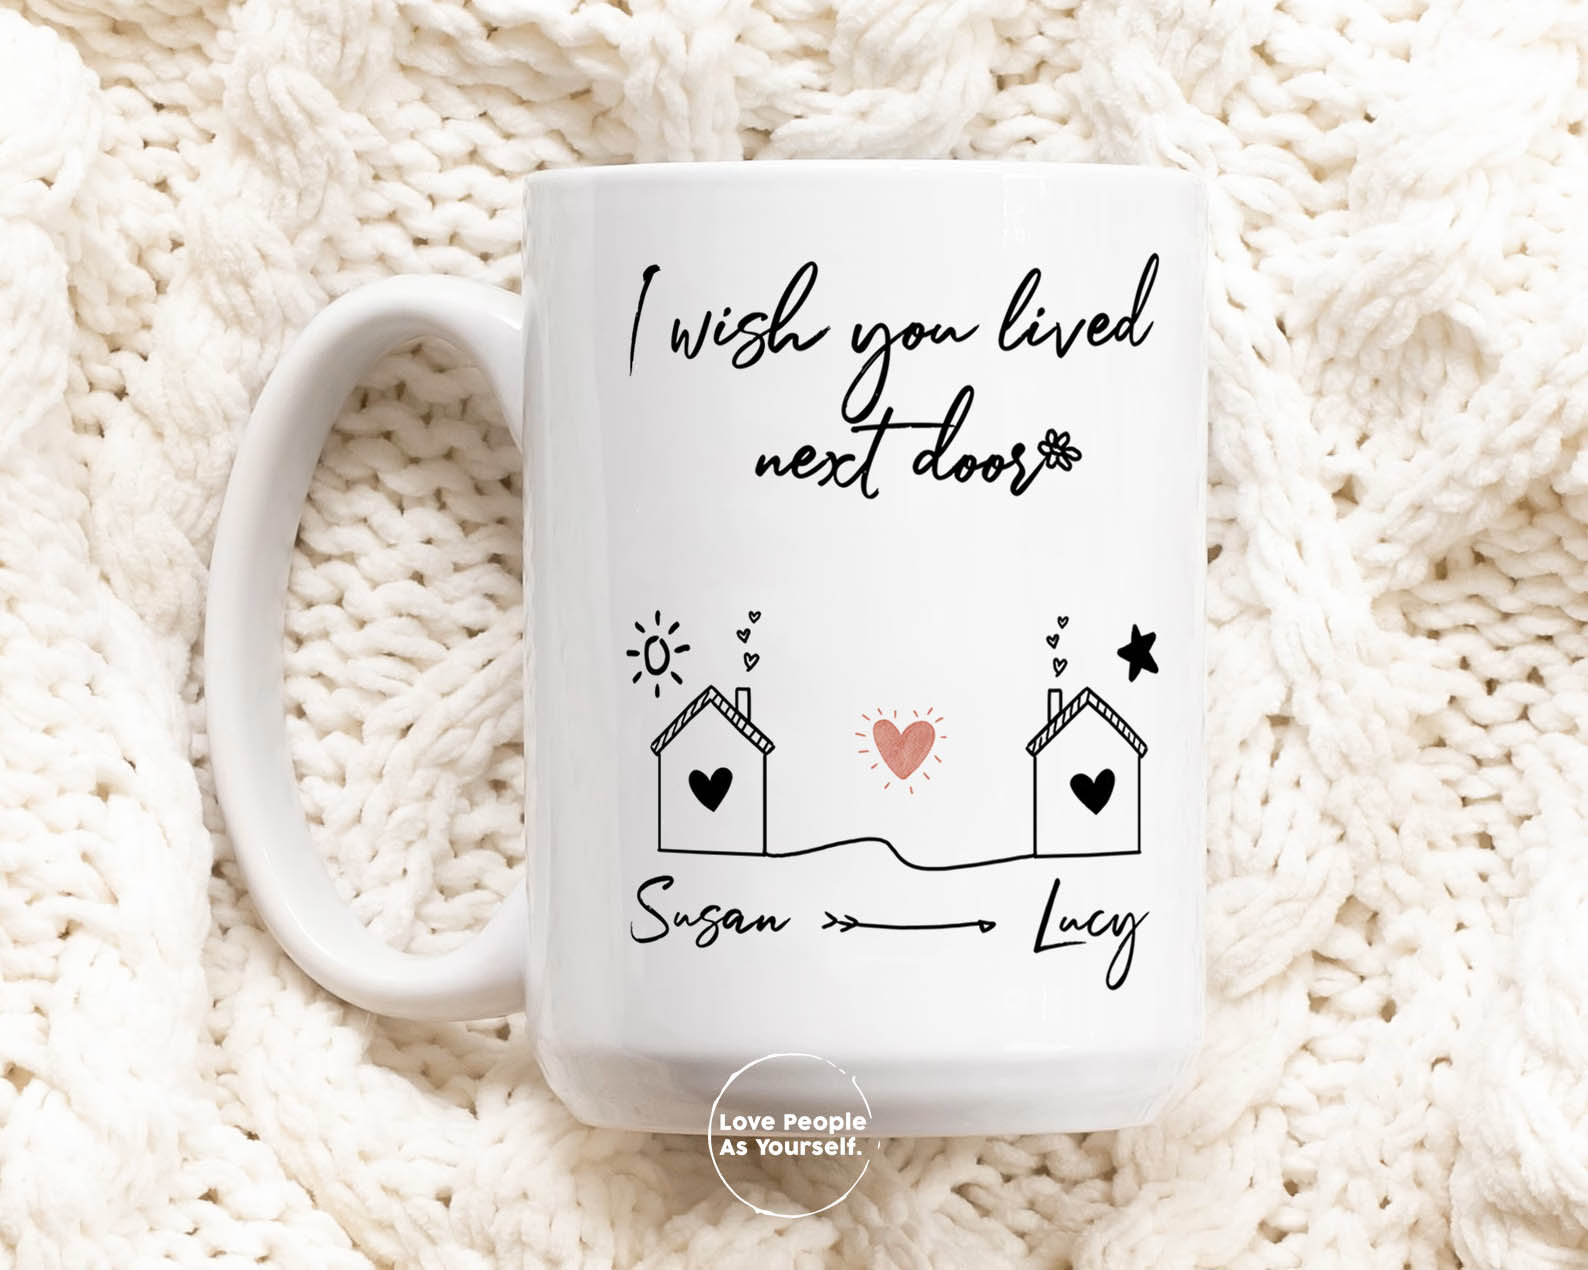 Personalized Best Friend Mug, Friendship Mug, I Wish You Lived Next Do -  Vista Stars - Personalized gifts for the loved ones